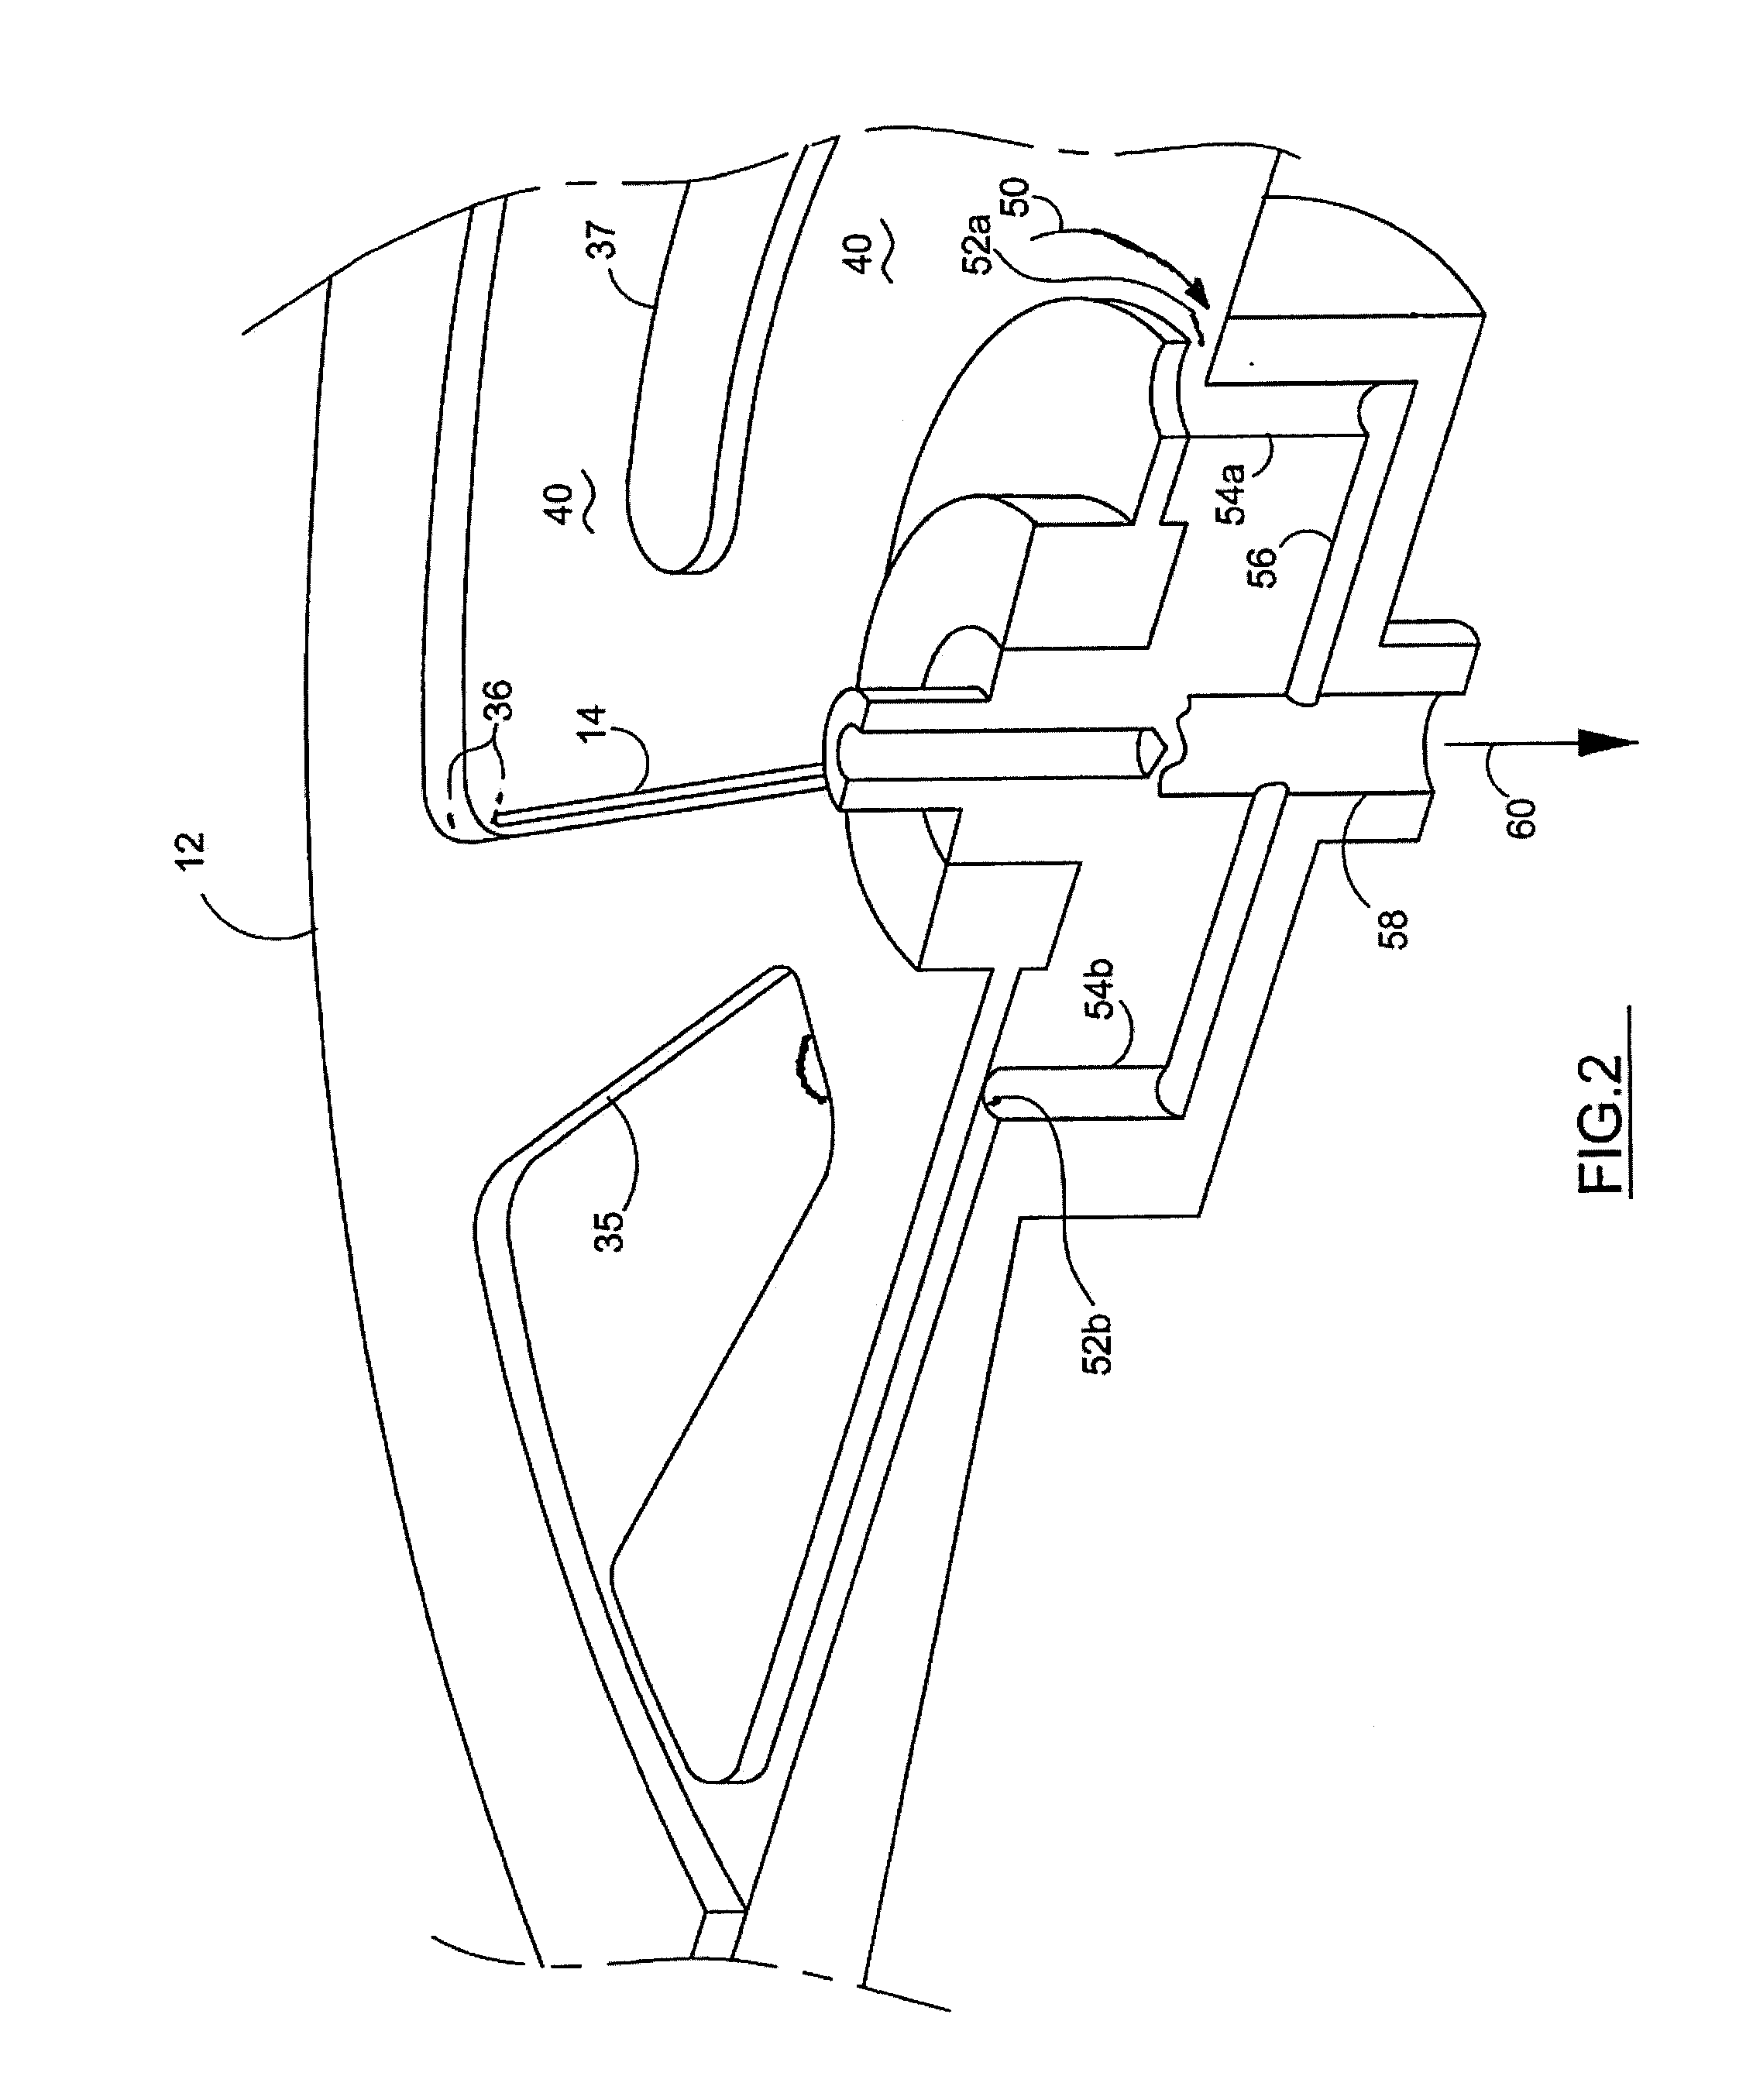 Method and System of Compressing Gas With Flow Restrictions